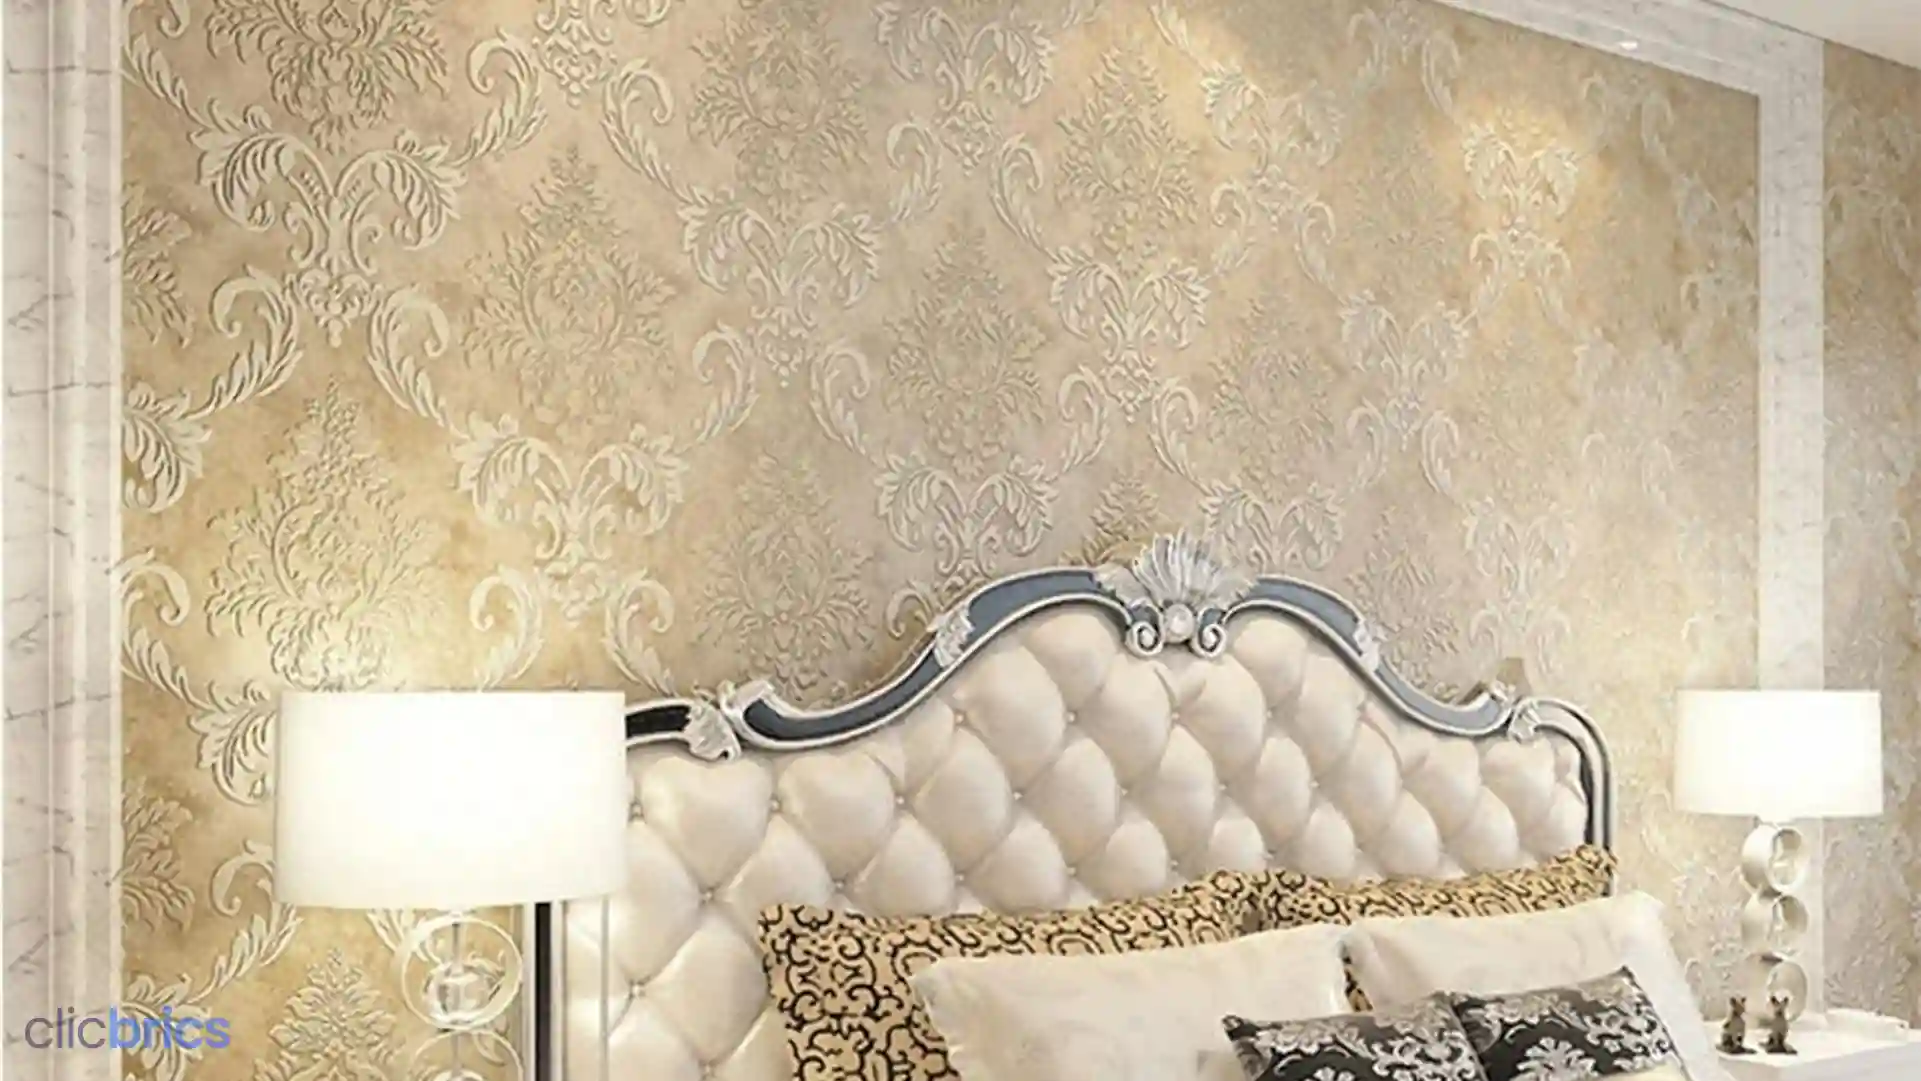 10 Royal Texture Paint Designs for Bedroom Walls